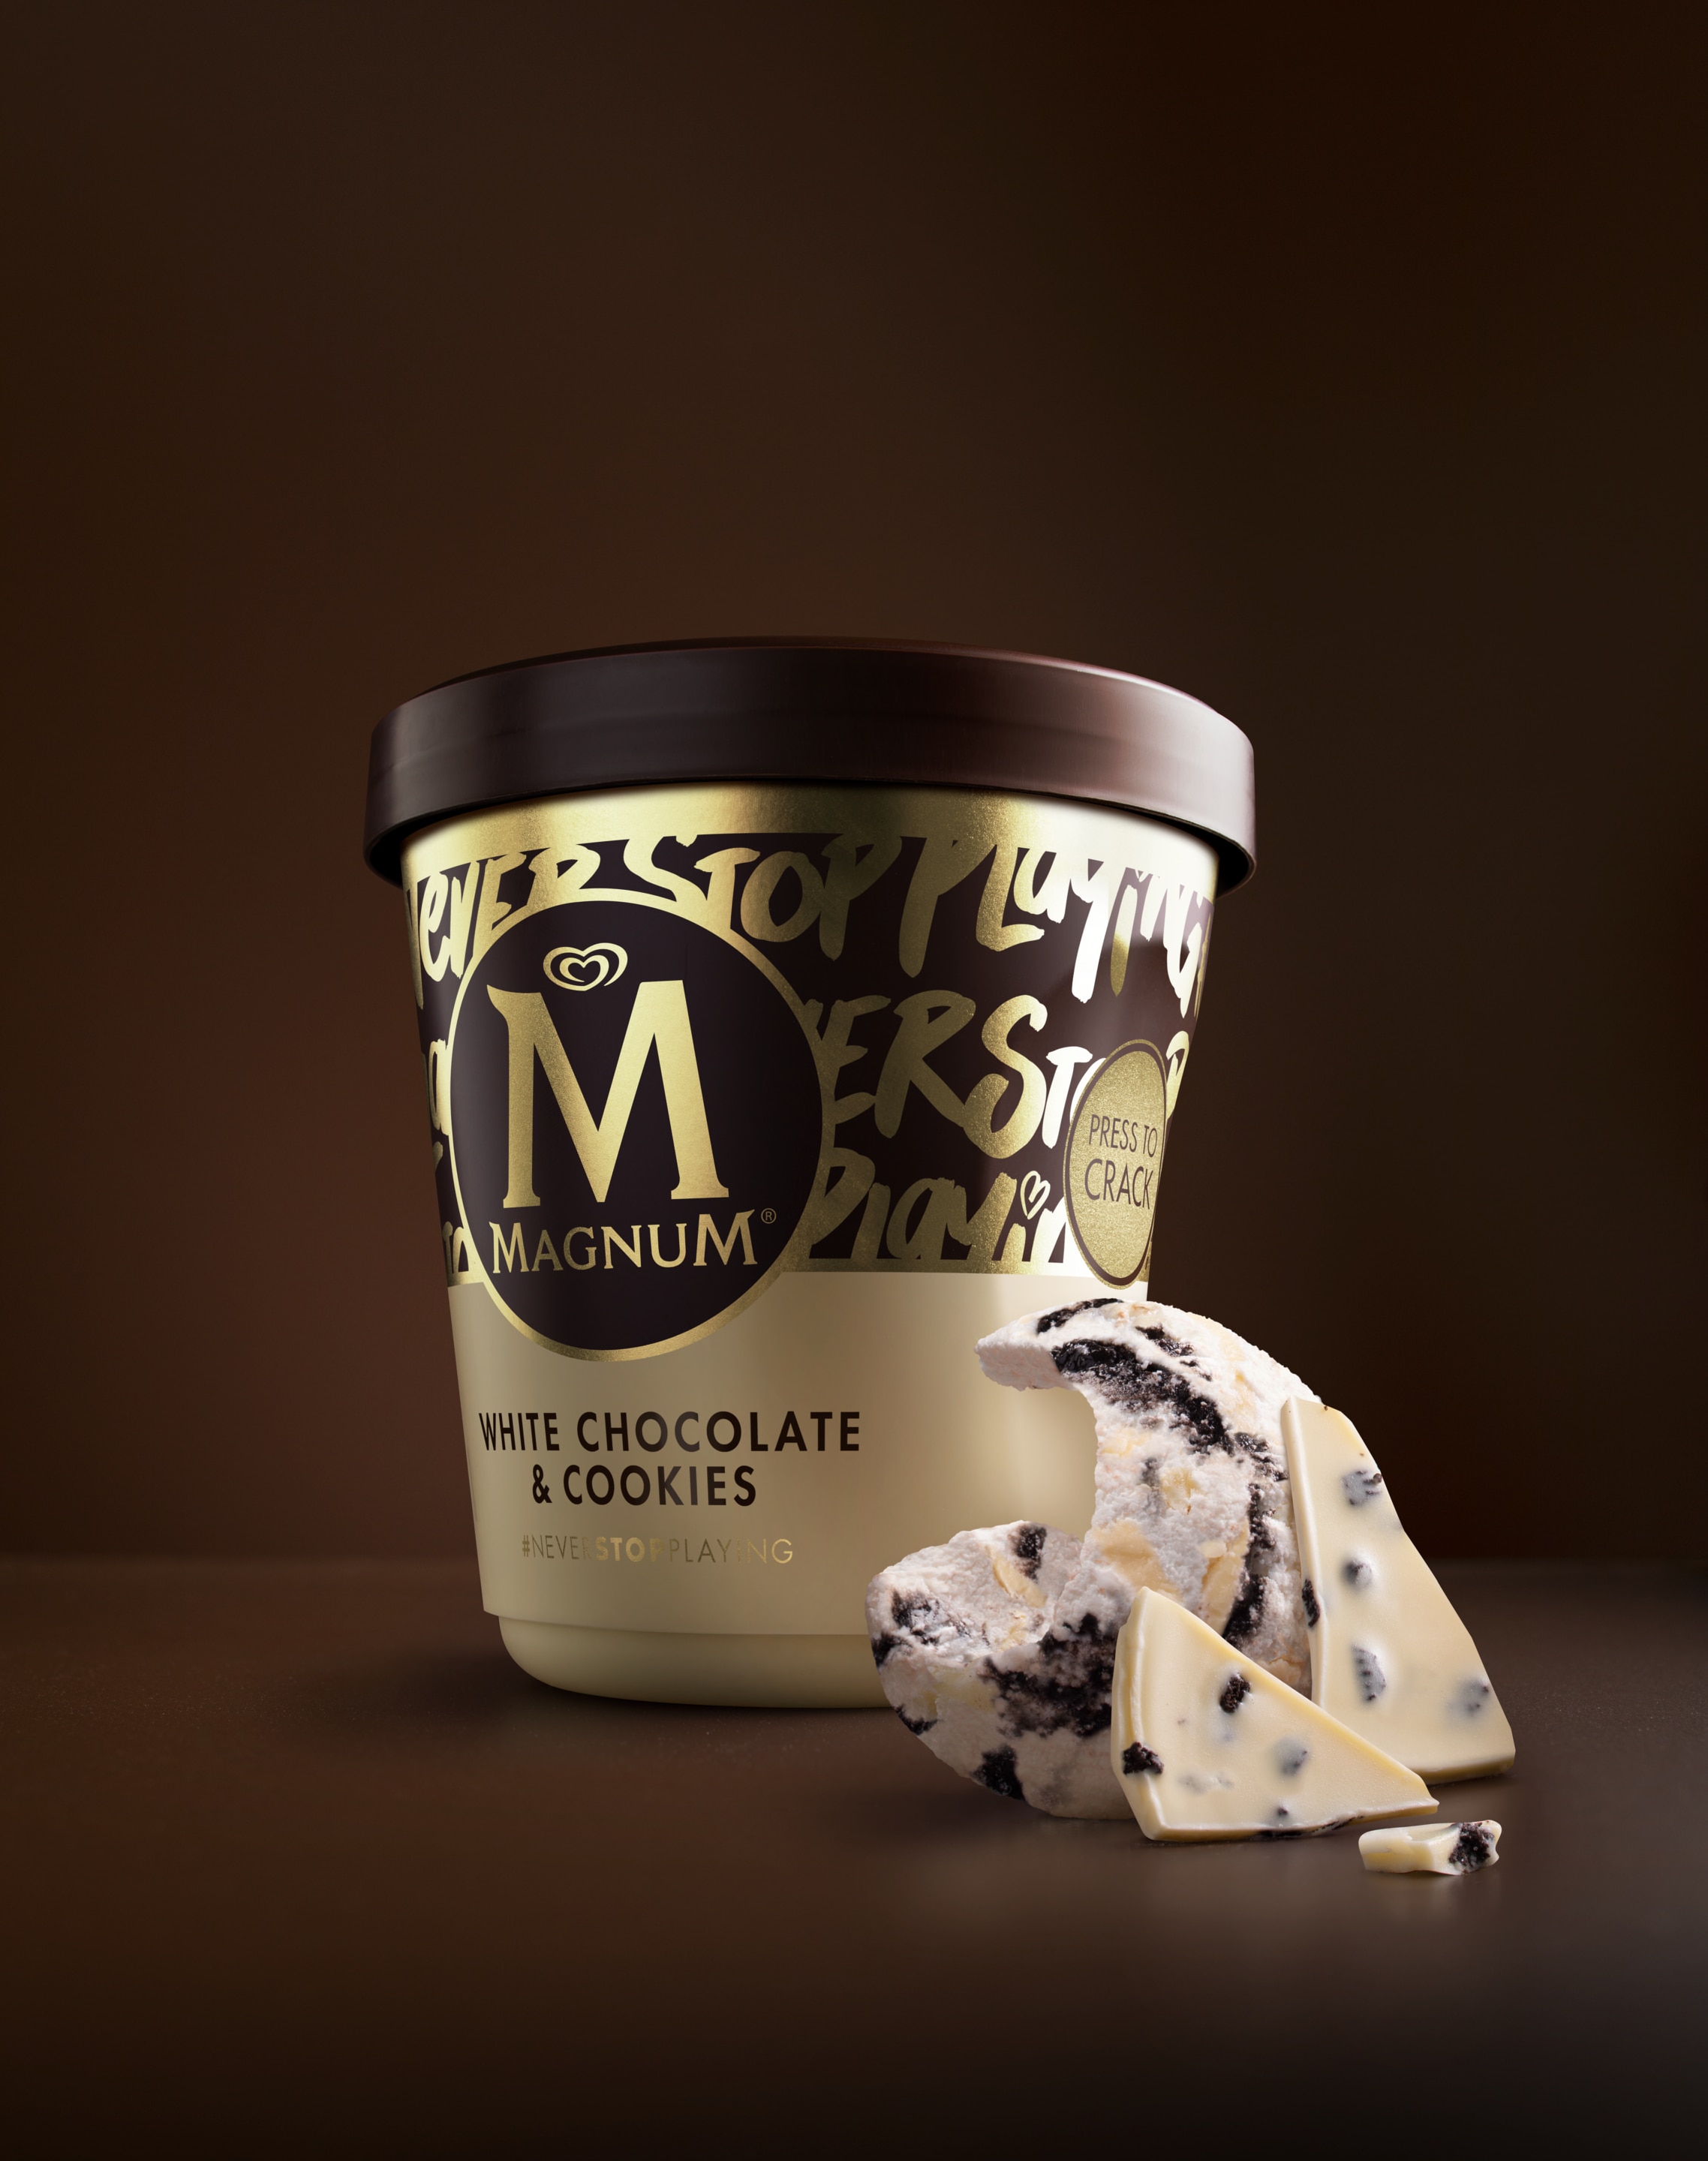 Magnum white chocolate and cookies ice cream pint  image  Text